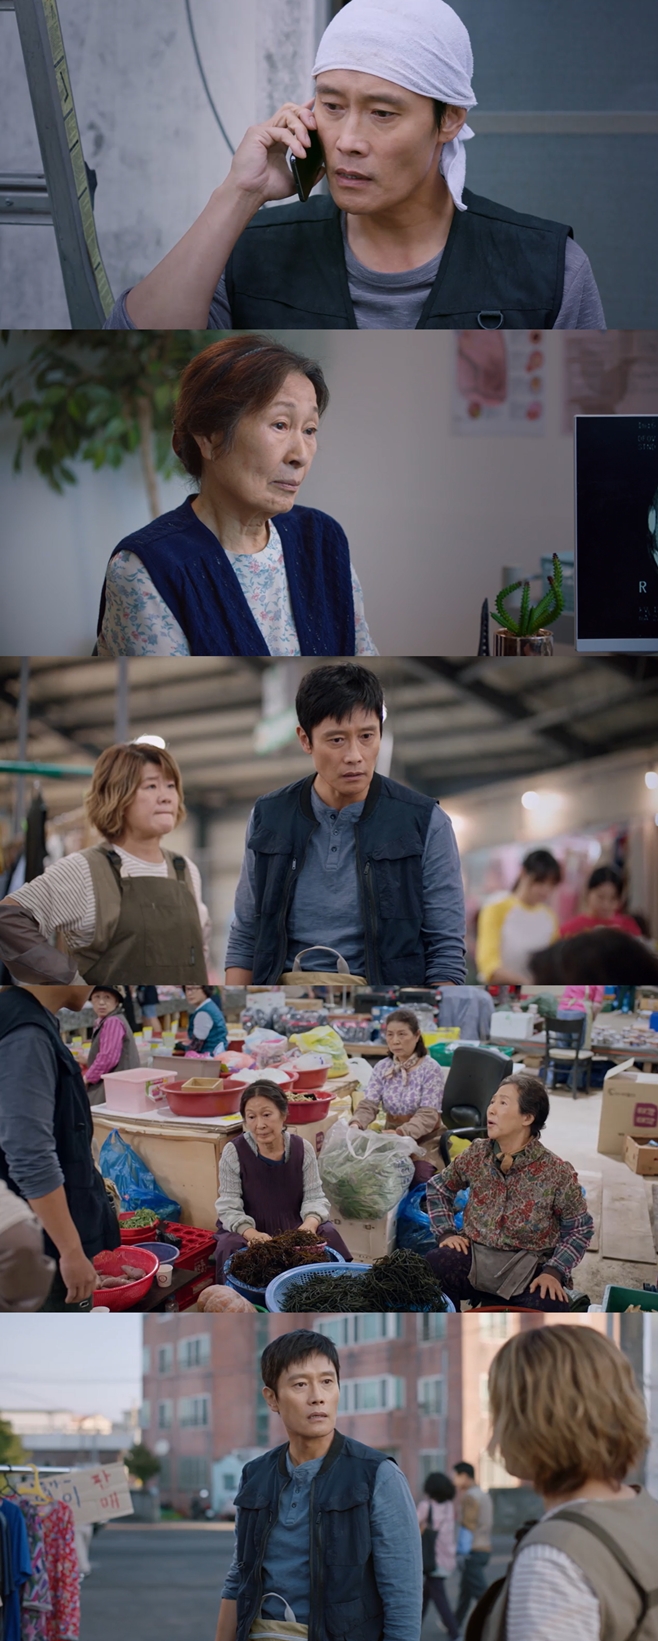 In Our Blues, it was revealed why the relationship between Hye-ja Kim Lee Byung-hun hat was estranged.In the TVN Saturday drama Our Blues (playplayed by Noh Hee-kyung and director Kim Gyu-tae) broadcast on the 23rd, the story of a couple of Jung Hyun (Bae Hyun-sung) and Bang Yeong-ju (Ro Yoon-seo) who were pregnant before marriage was drawn, while the secret of Kang Ok-dong (Lee Byung-hun) hat was also unveiled.On the day of the broadcast, Kang Ok-dong visited the hospital and while waiting for his turn, he called son dynamite and asked him How about rice? Dynamite said, I am a passenger.Is not it wrong to call? Kang Ok-dong hastily hung up to get medical attention. Then there was a shocking conversation in the clinic.The doctor urged him to be hospitalized immediately, saying, Why did you come alone because you came with your son? The cancer was spread to the lungs of Wiet and the liver, and the surgery was not possible.However, Kang Ok-dong did not hospitalize, saying, Just ask for digestive drugs.Since then, the hat has been reunited in the oil field. Dynamite, who usually ignores Gangok-dong, comes to the vegetable seat of Gangok-dong and says, Little mom. We were calling without work.We are not like that. If your little mother dies, I will give you a funeral.Jung Eun-hee (Lee Jung-eun) followed him and criticized him, but Dynamite was angry, calling Kang Ok-dong a small mother until the end, saying, How do you eat with your father, Friend, who is the most disliked man, even if he likes men?